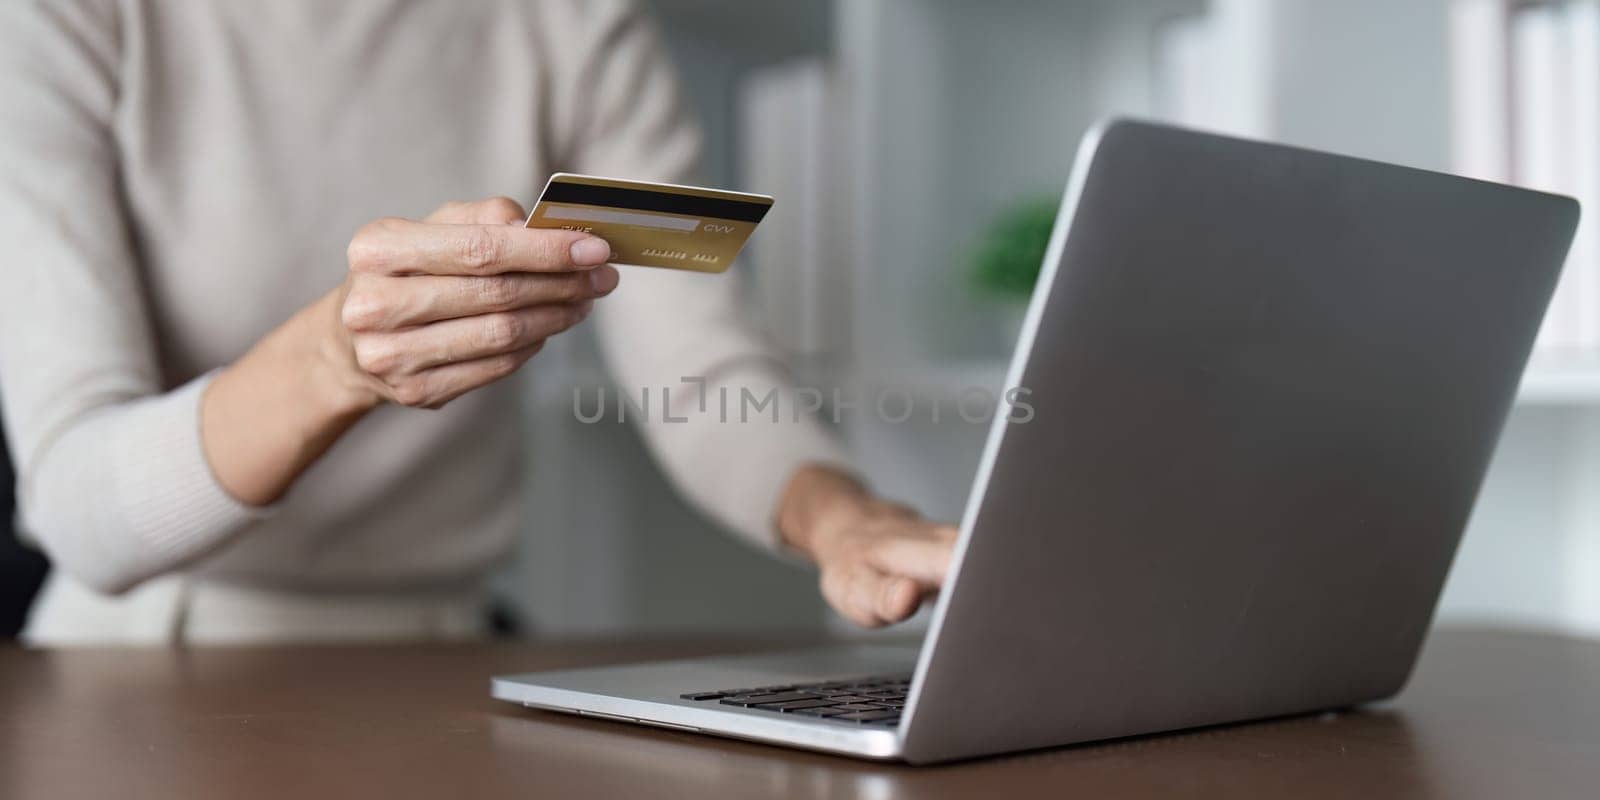 A woman is using a laptop to pay for something with a credit card. She is holding the card in her hand and typing on the keyboard. Concept of convenience and ease